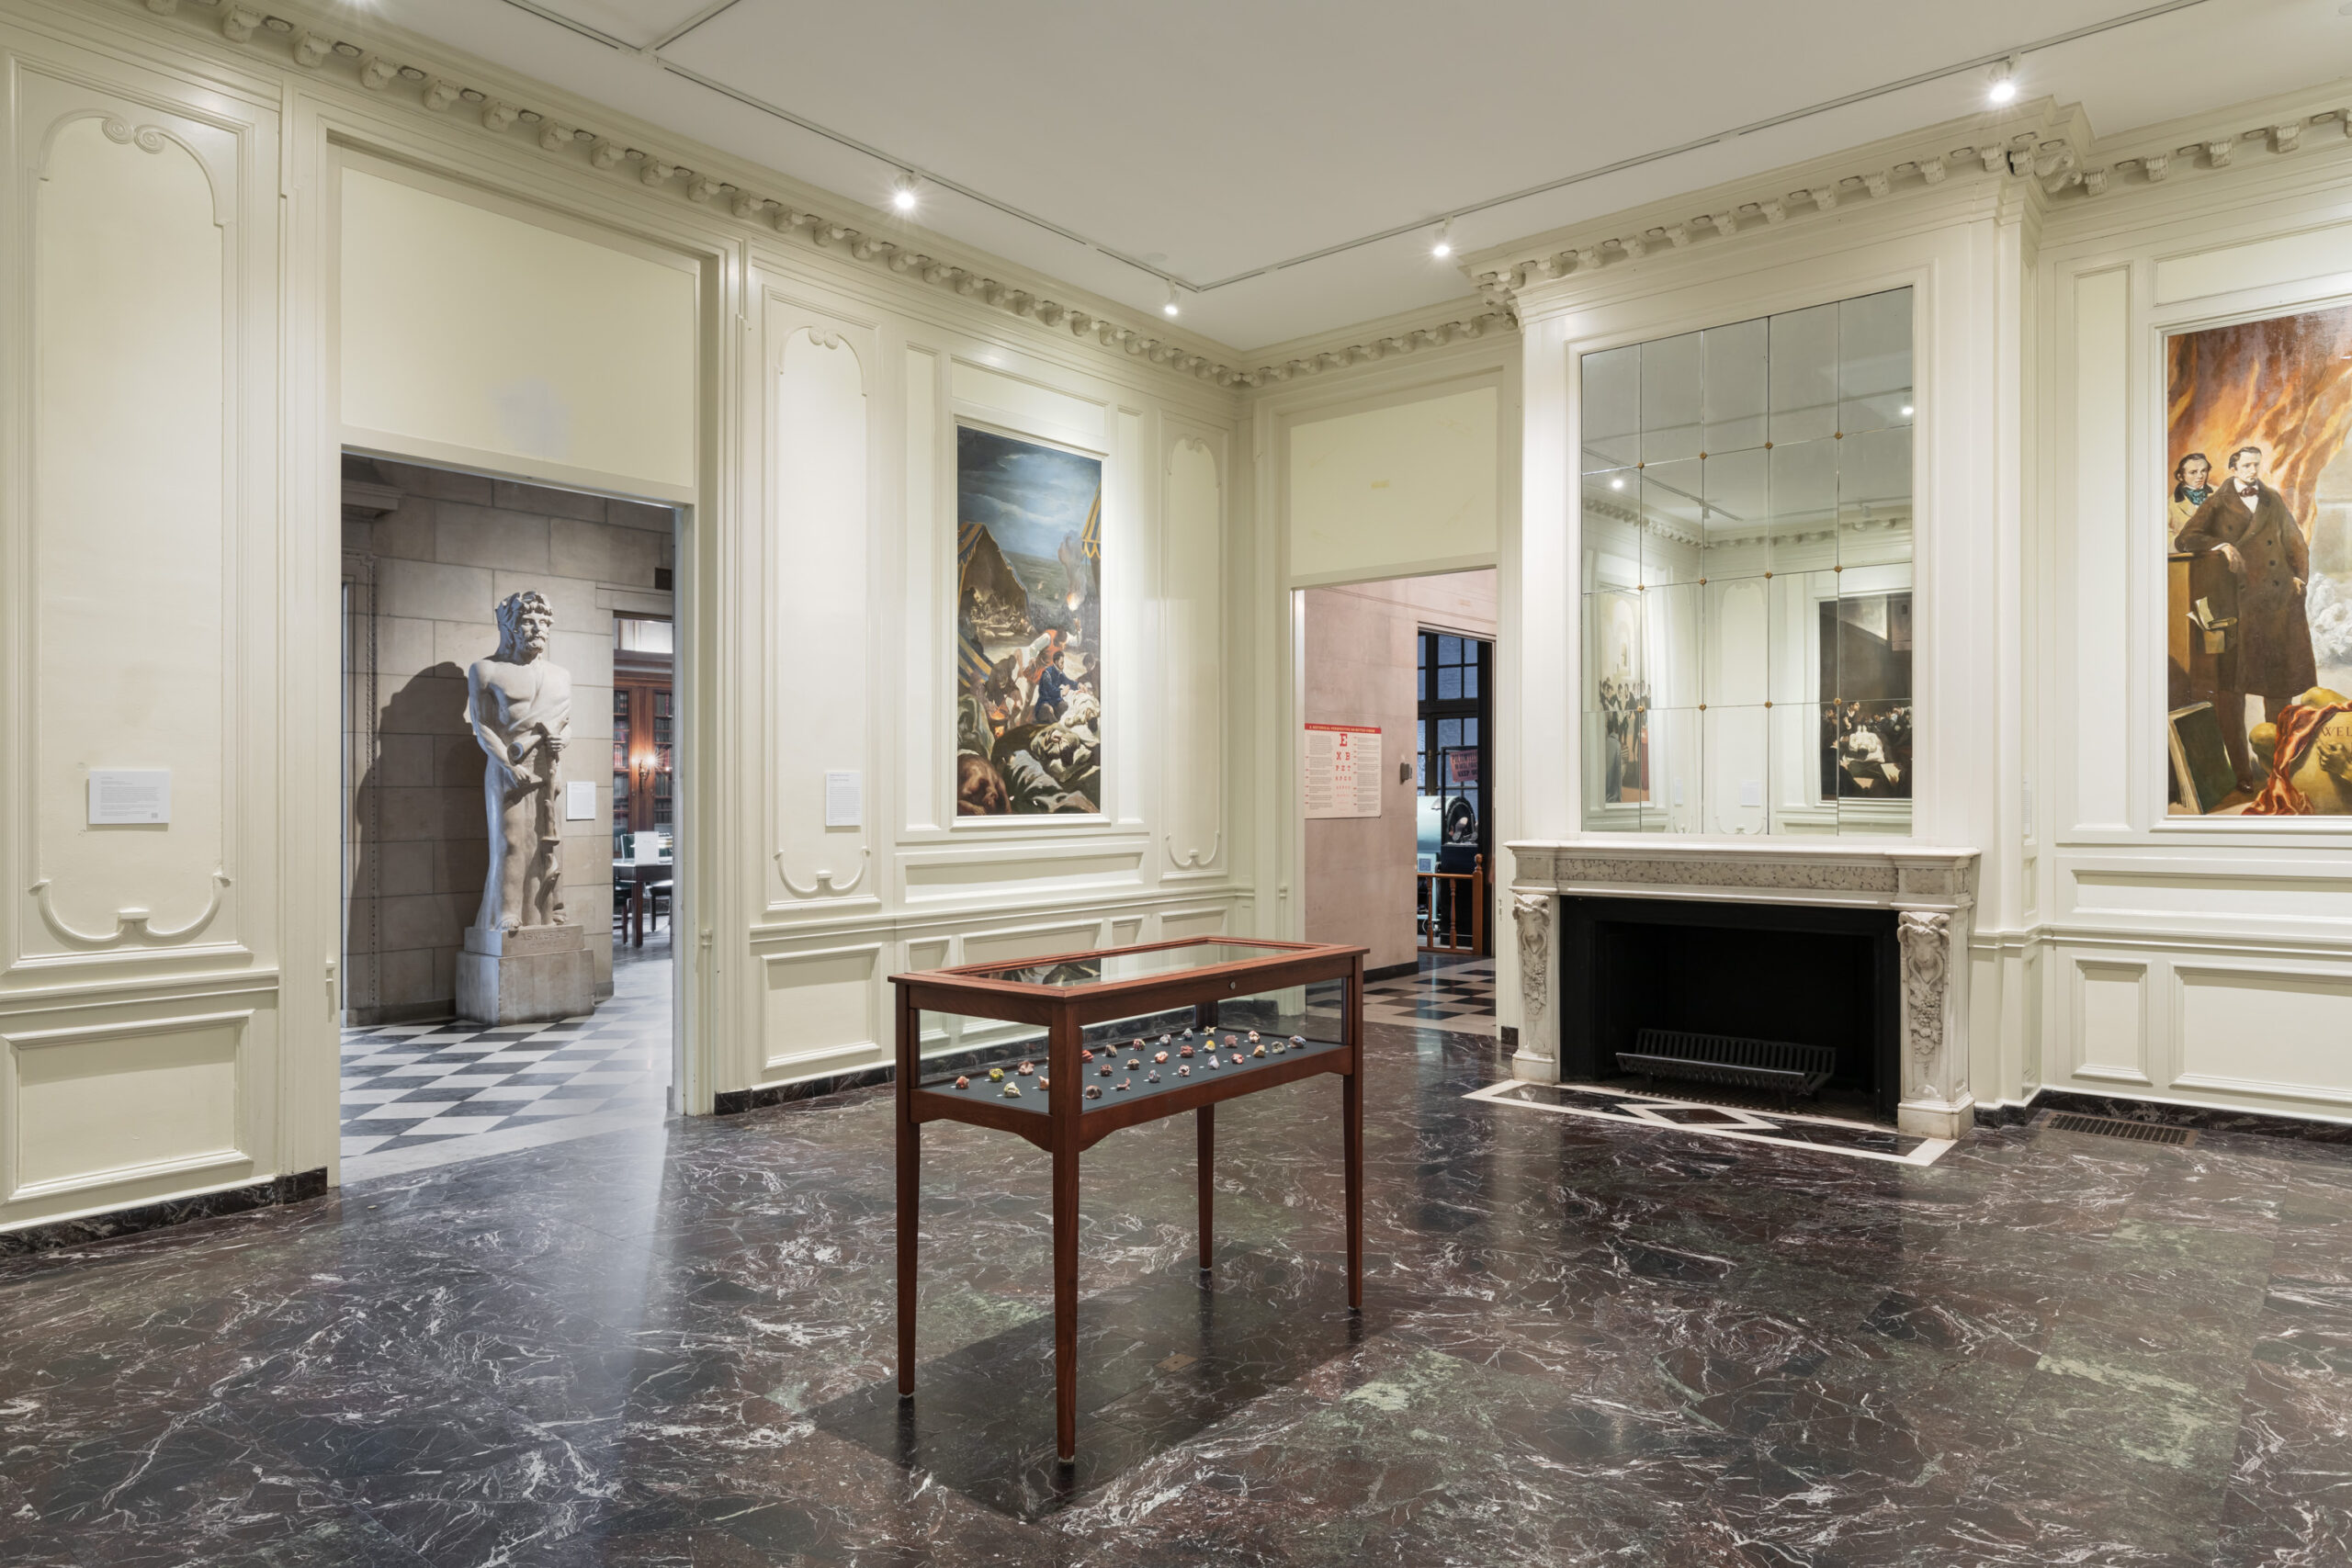 a wide angle photo taken from one corner of a large off-white room with ornate molding and vertically-oriented murals displaying different scenes from medical history like autopsies, deliveries, and academies. 2 murals are visible on the walls and another 2 in a large mural above a closed fireplace. A sleek wooden display case with clear glass panels rests in the center of the grand room atop a black, white and green marble stone floor. Inside the display case rests 30 small 3d-printed candies in a variety of colors. The room has two large doorframes that lead to other hallways in rooms in the museum.